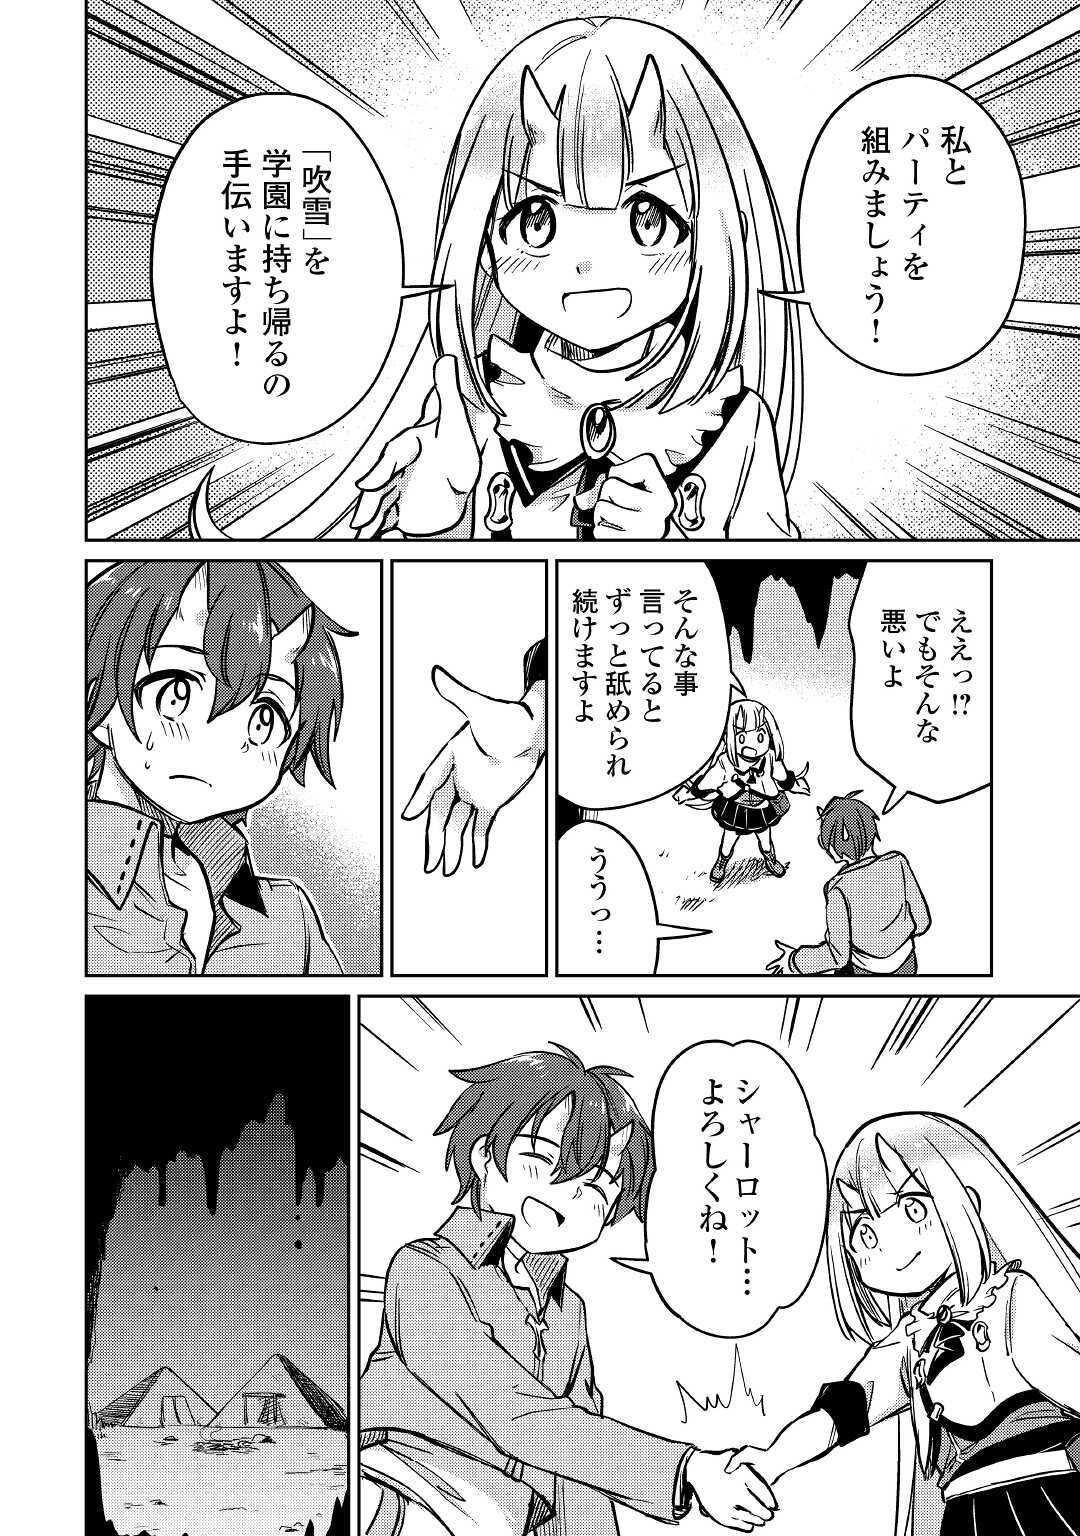 The Former Structural Researcher’s Story of Otherworldly Adventure 第28話 - Page 24